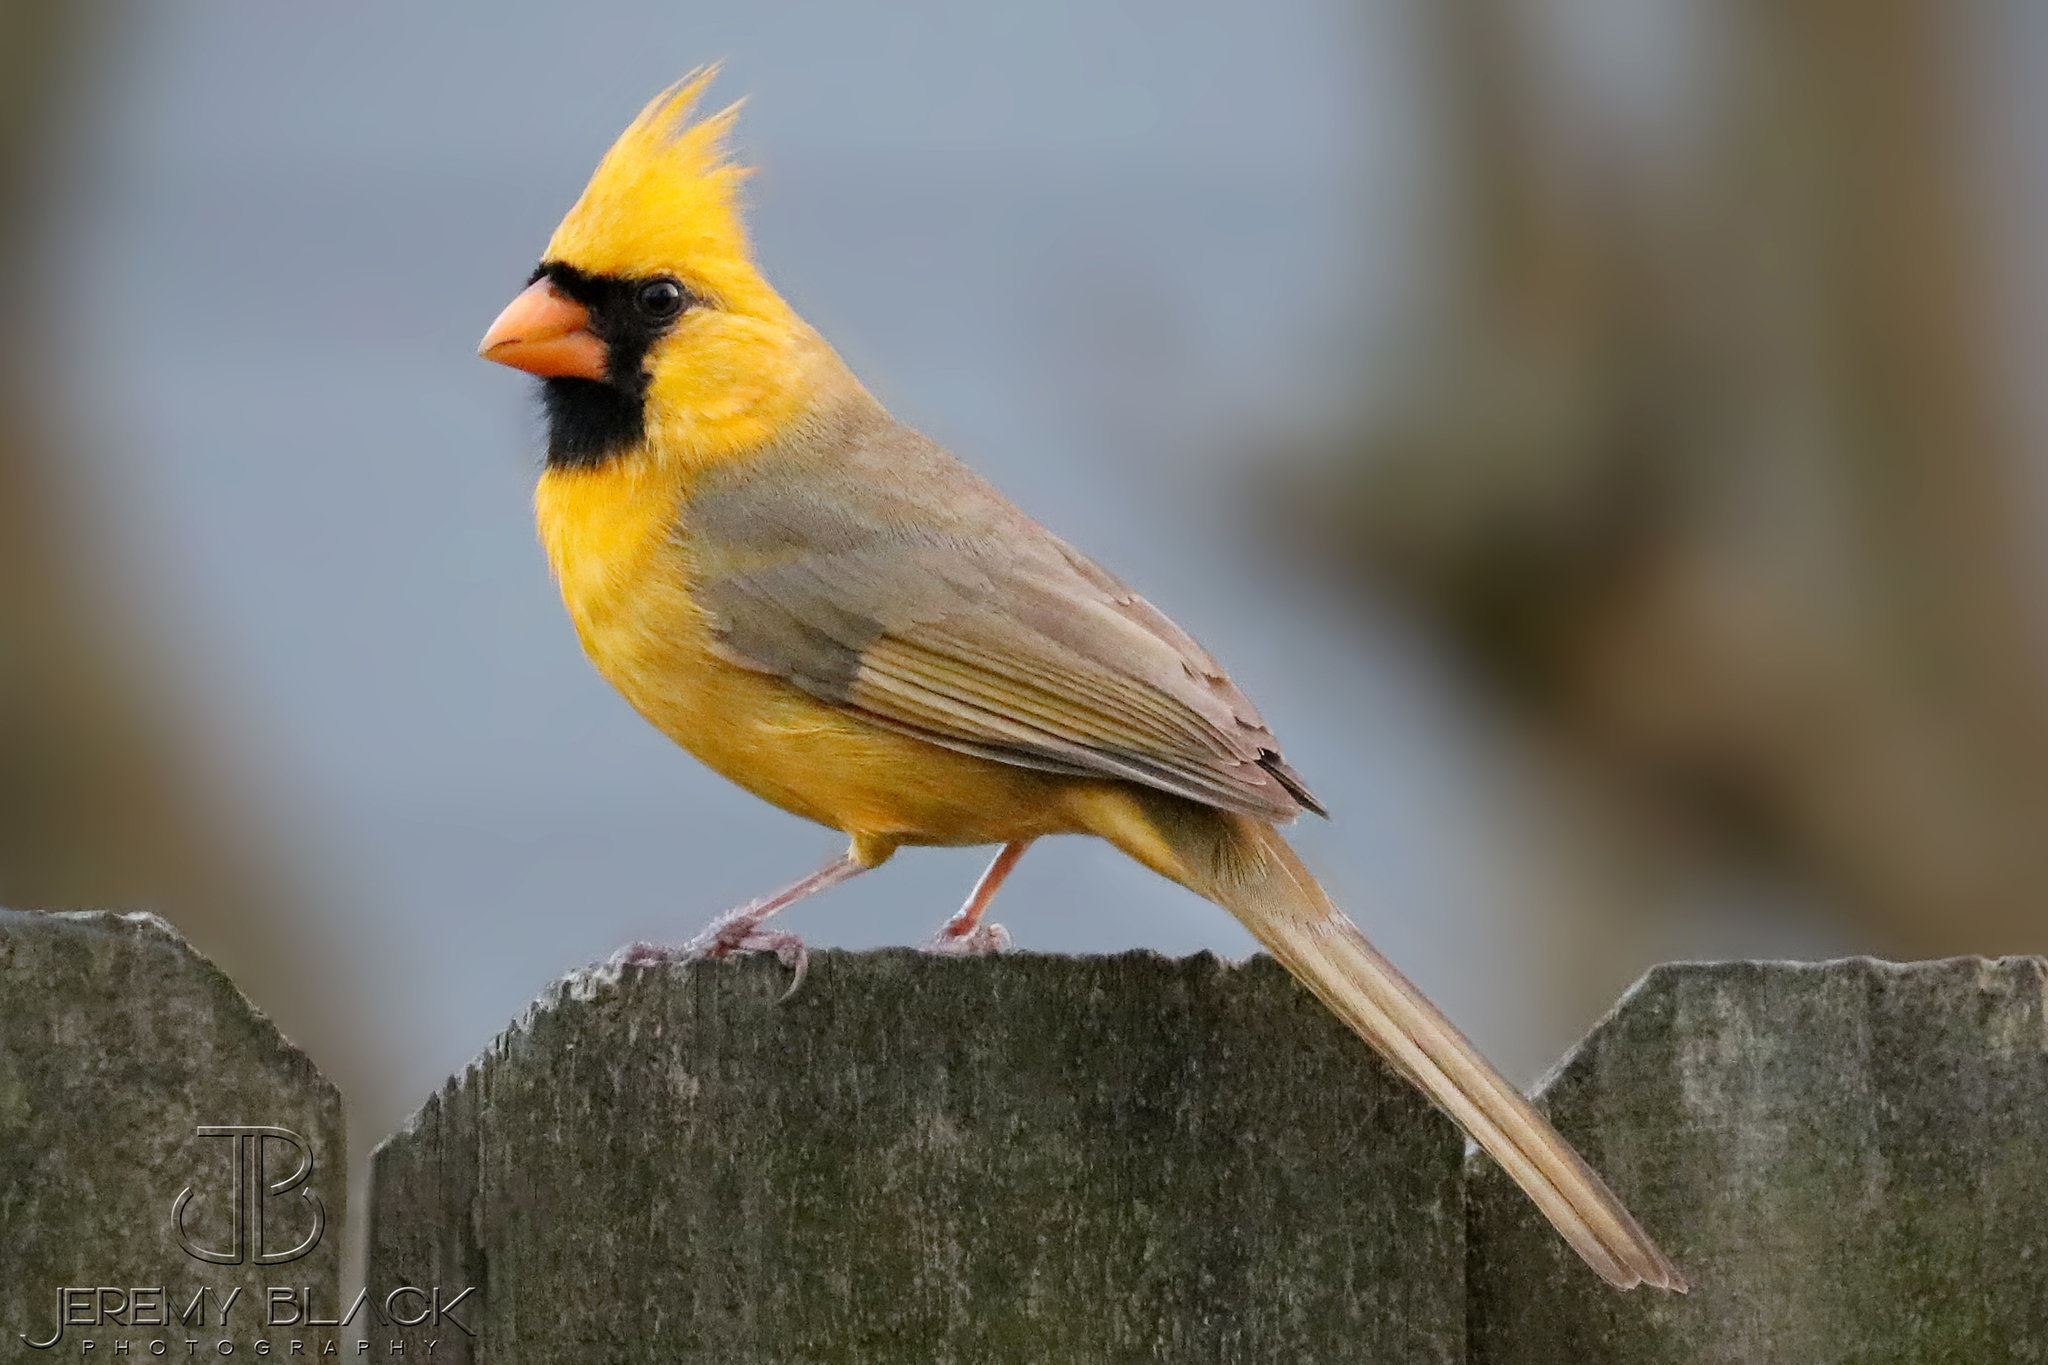 One in a million' yellow cardinal spotted in Alabama | AL.com